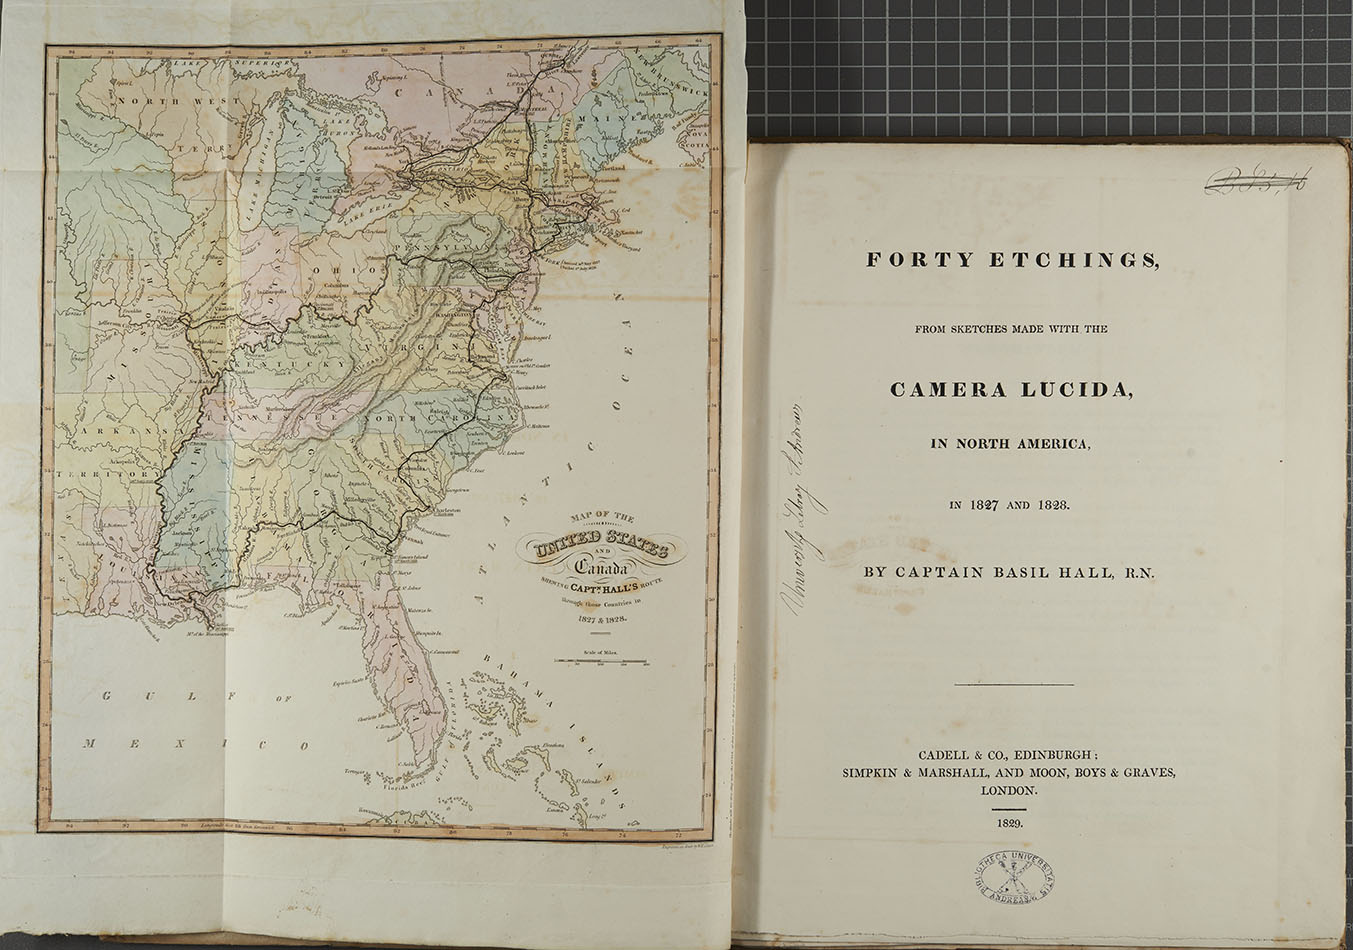 02b Title page and fold out map showing Capt Hall's route through Canada and America in 1827 and 1828 [rfF1013.H2]_1